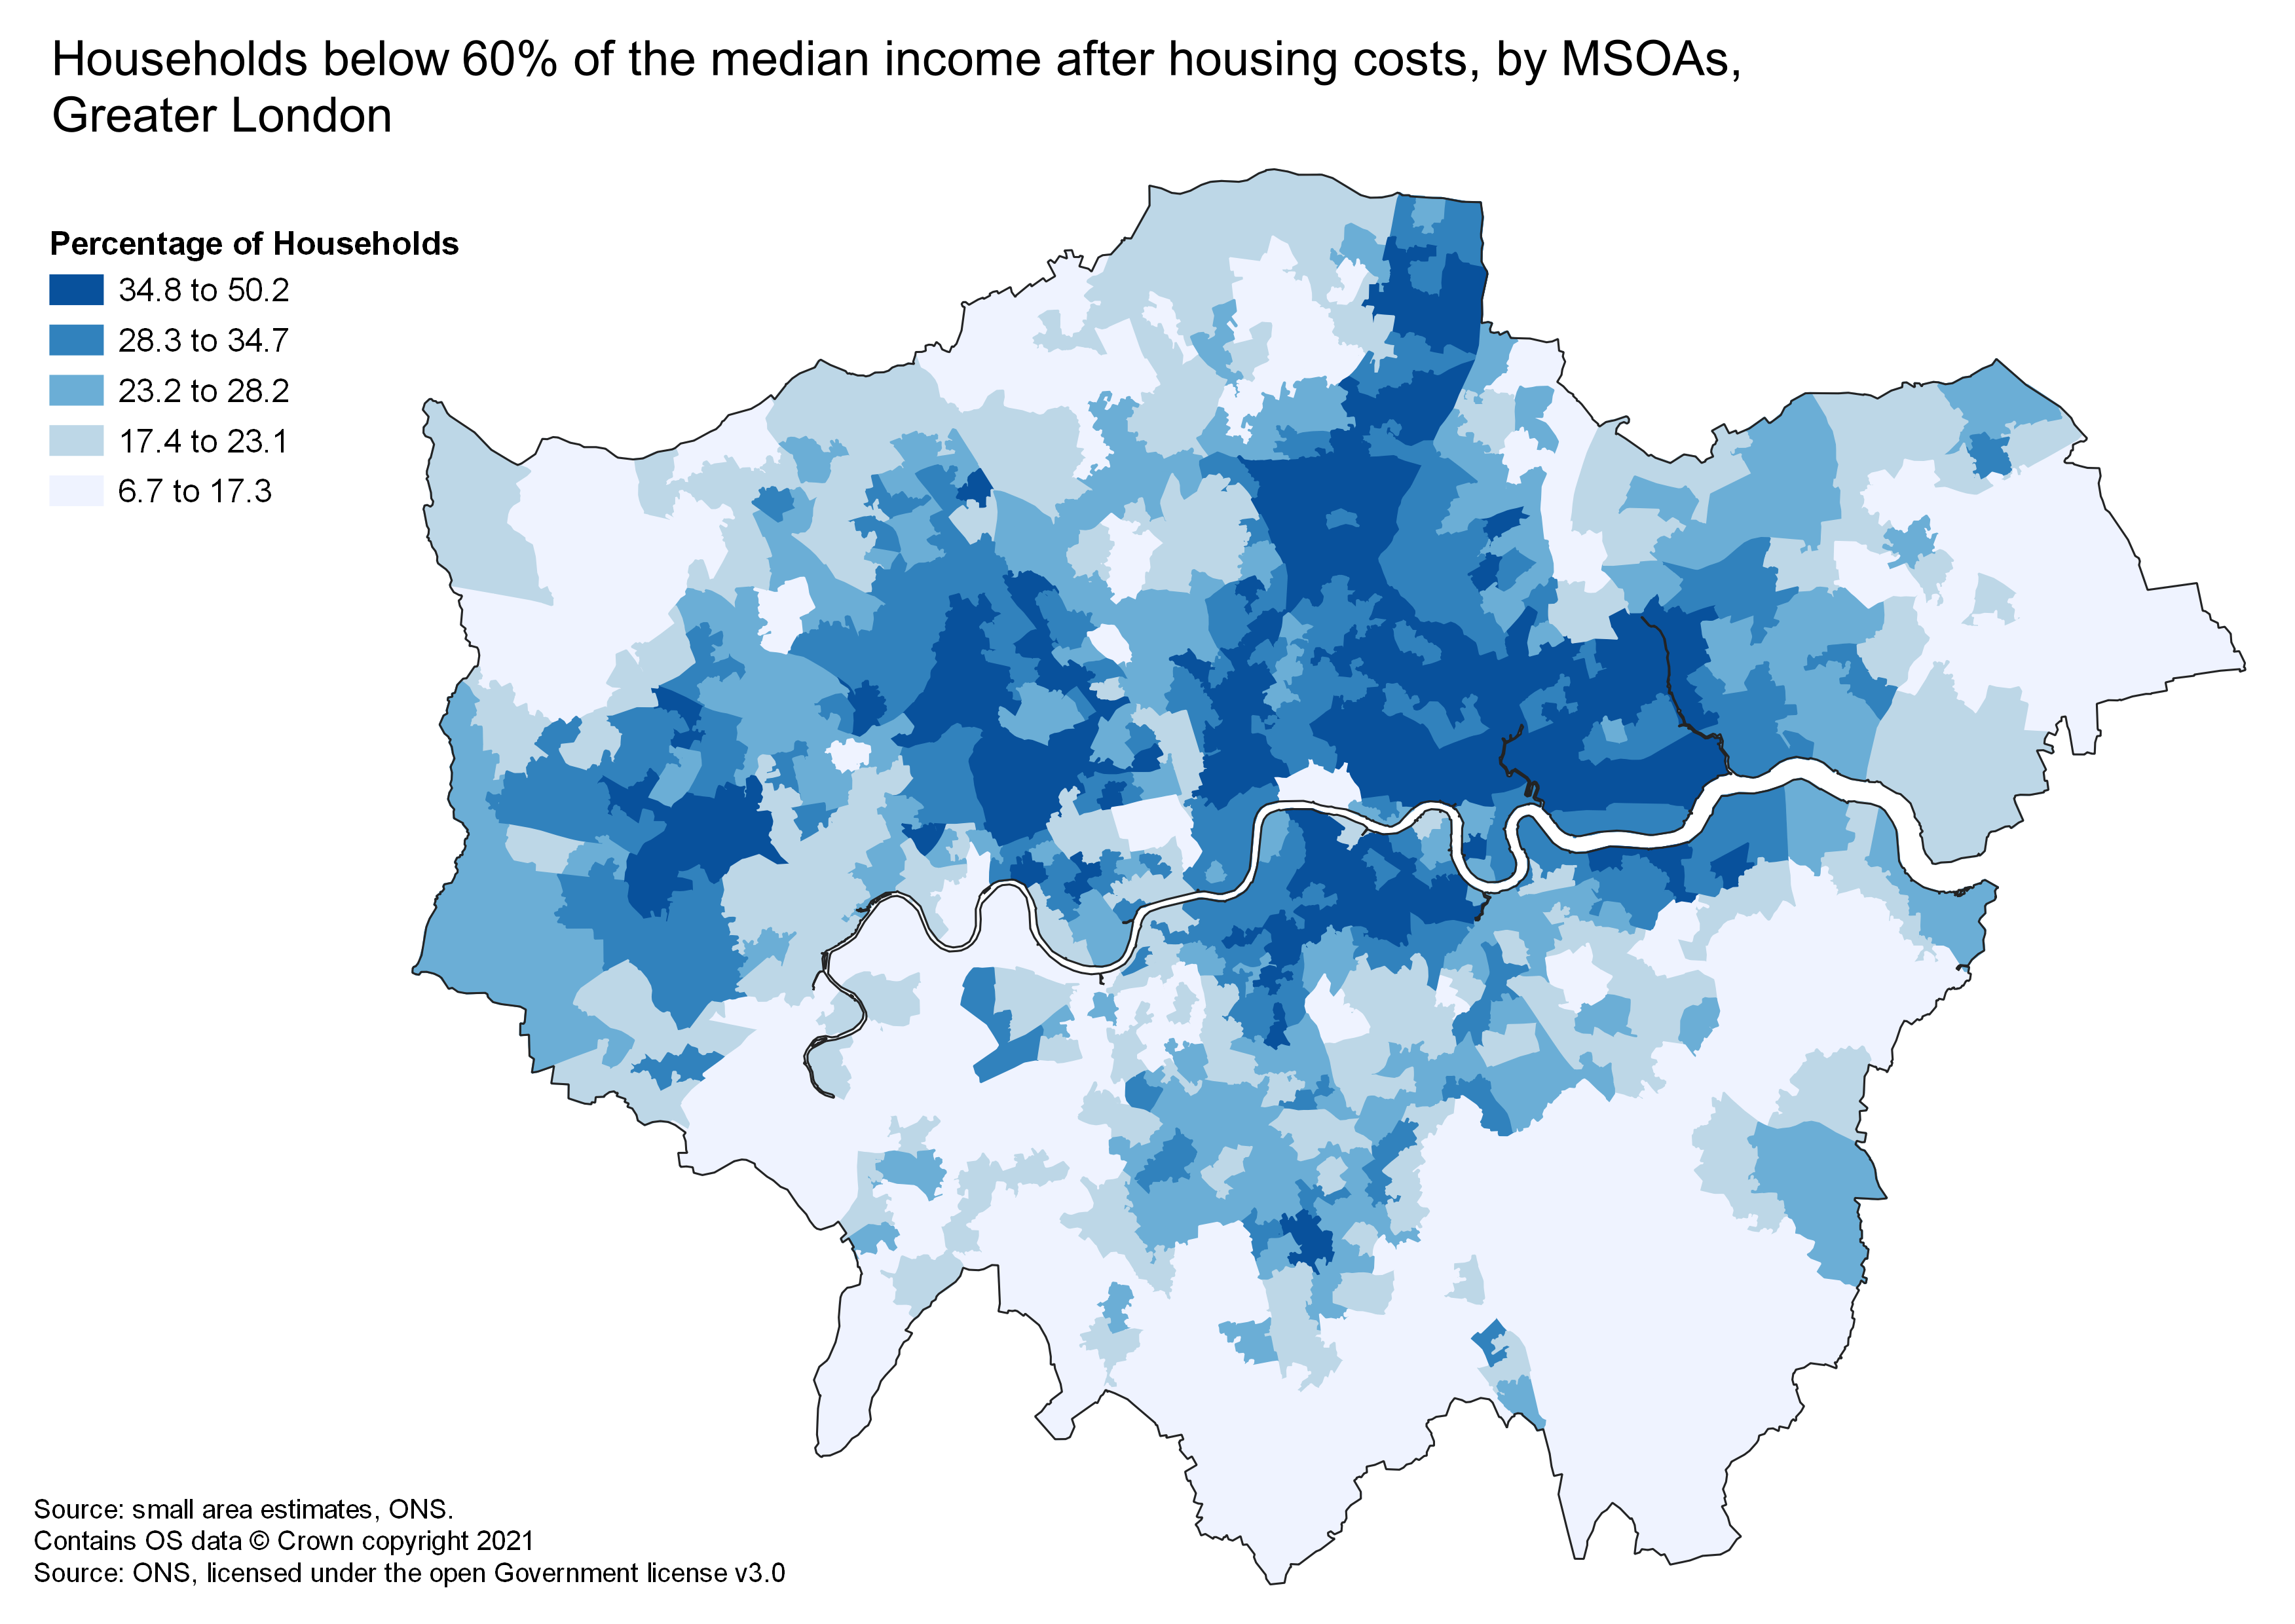 A choropleth of the percentage of households below 60% of median income, after housing costs, in London MSOA